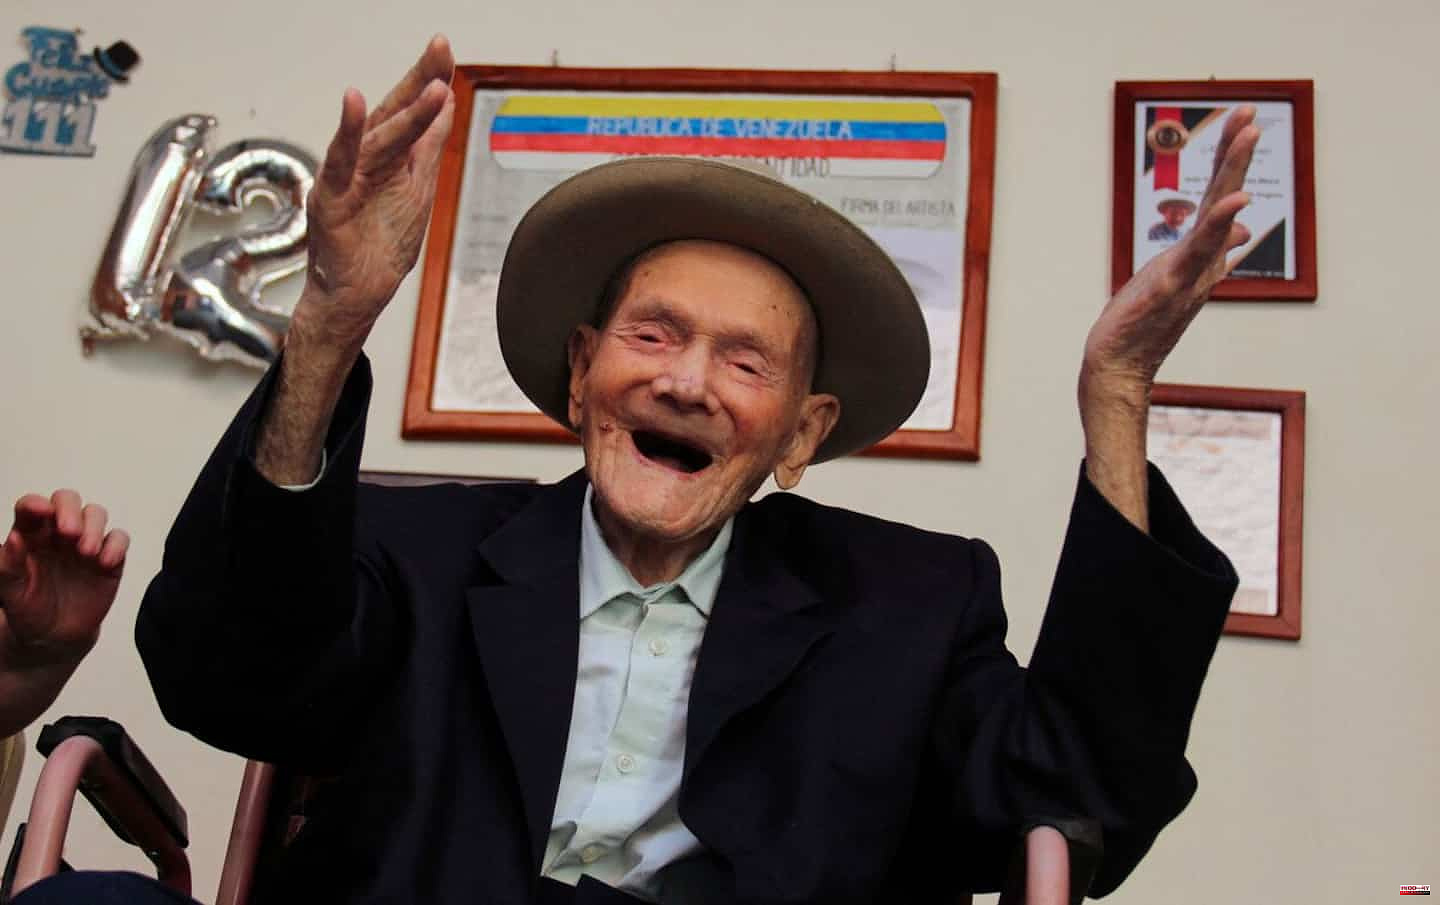 At 112, a Venezuelan becomes the oldest man in the world